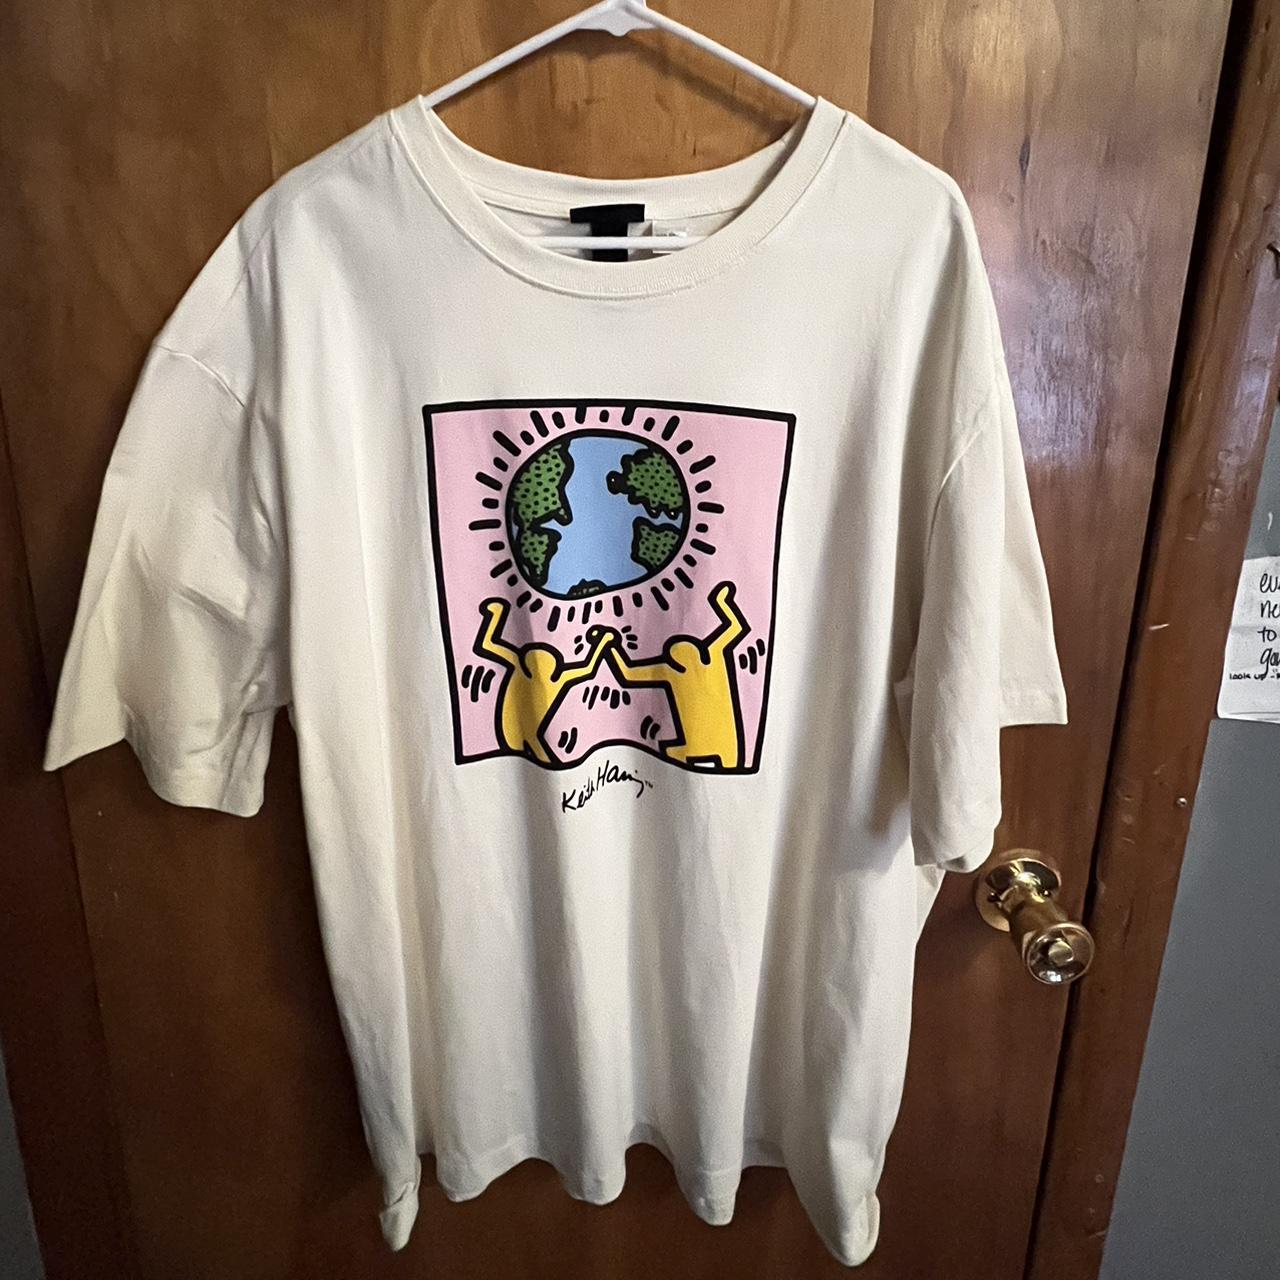 keith haring shirt from h&m - Depop